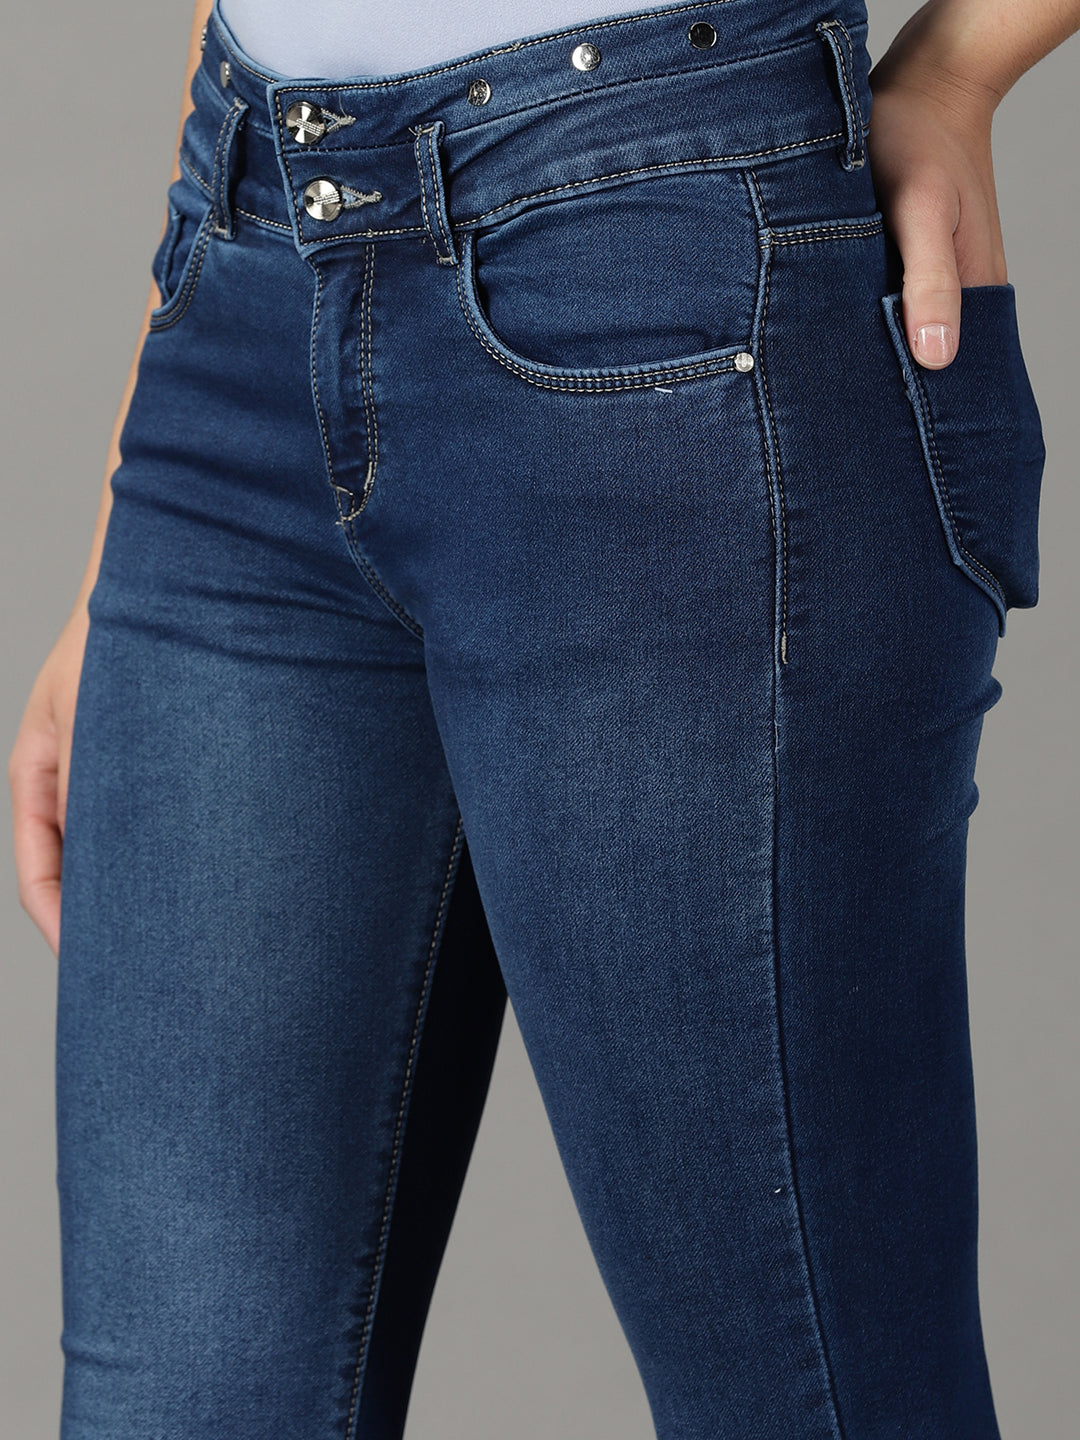 Women Solid Navy Blue Tapered Fit Denim Jeans